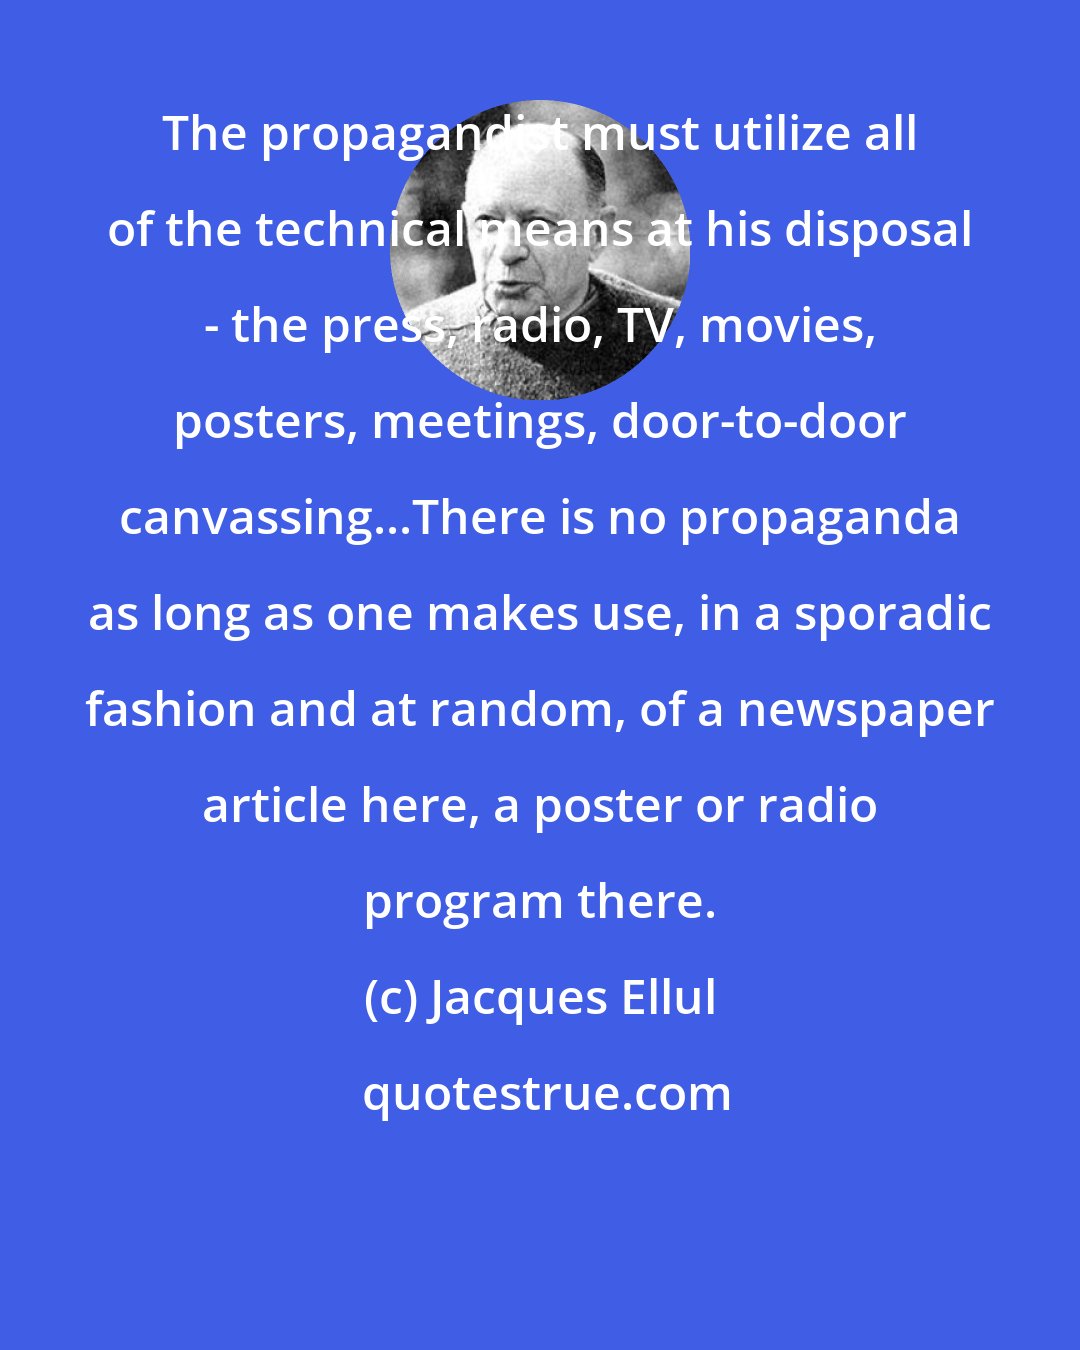 Jacques Ellul: The propagandist must utilize all of the technical means at his disposal - the press, radio, TV, movies, posters, meetings, door-to-door canvassing...There is no propaganda as long as one makes use, in a sporadic fashion and at random, of a newspaper article here, a poster or radio program there.